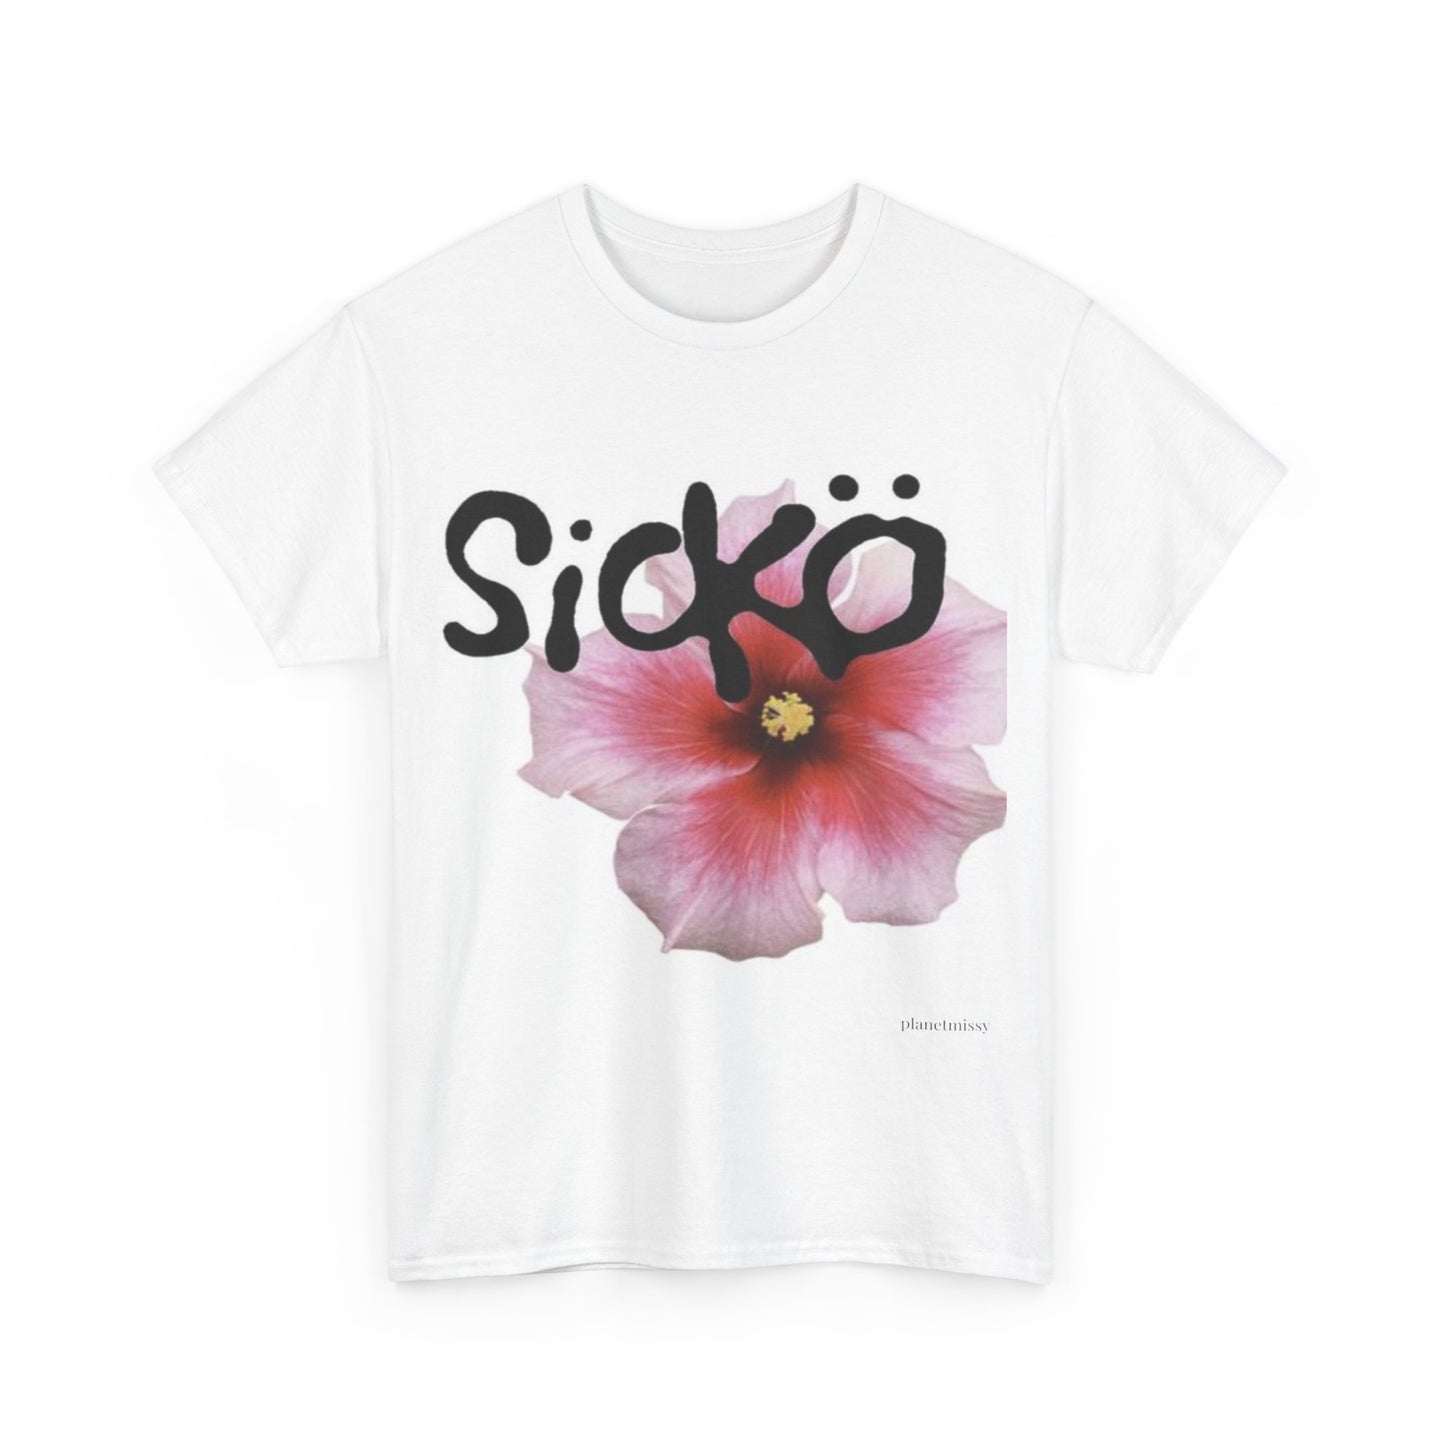 Sicko Floral Tee